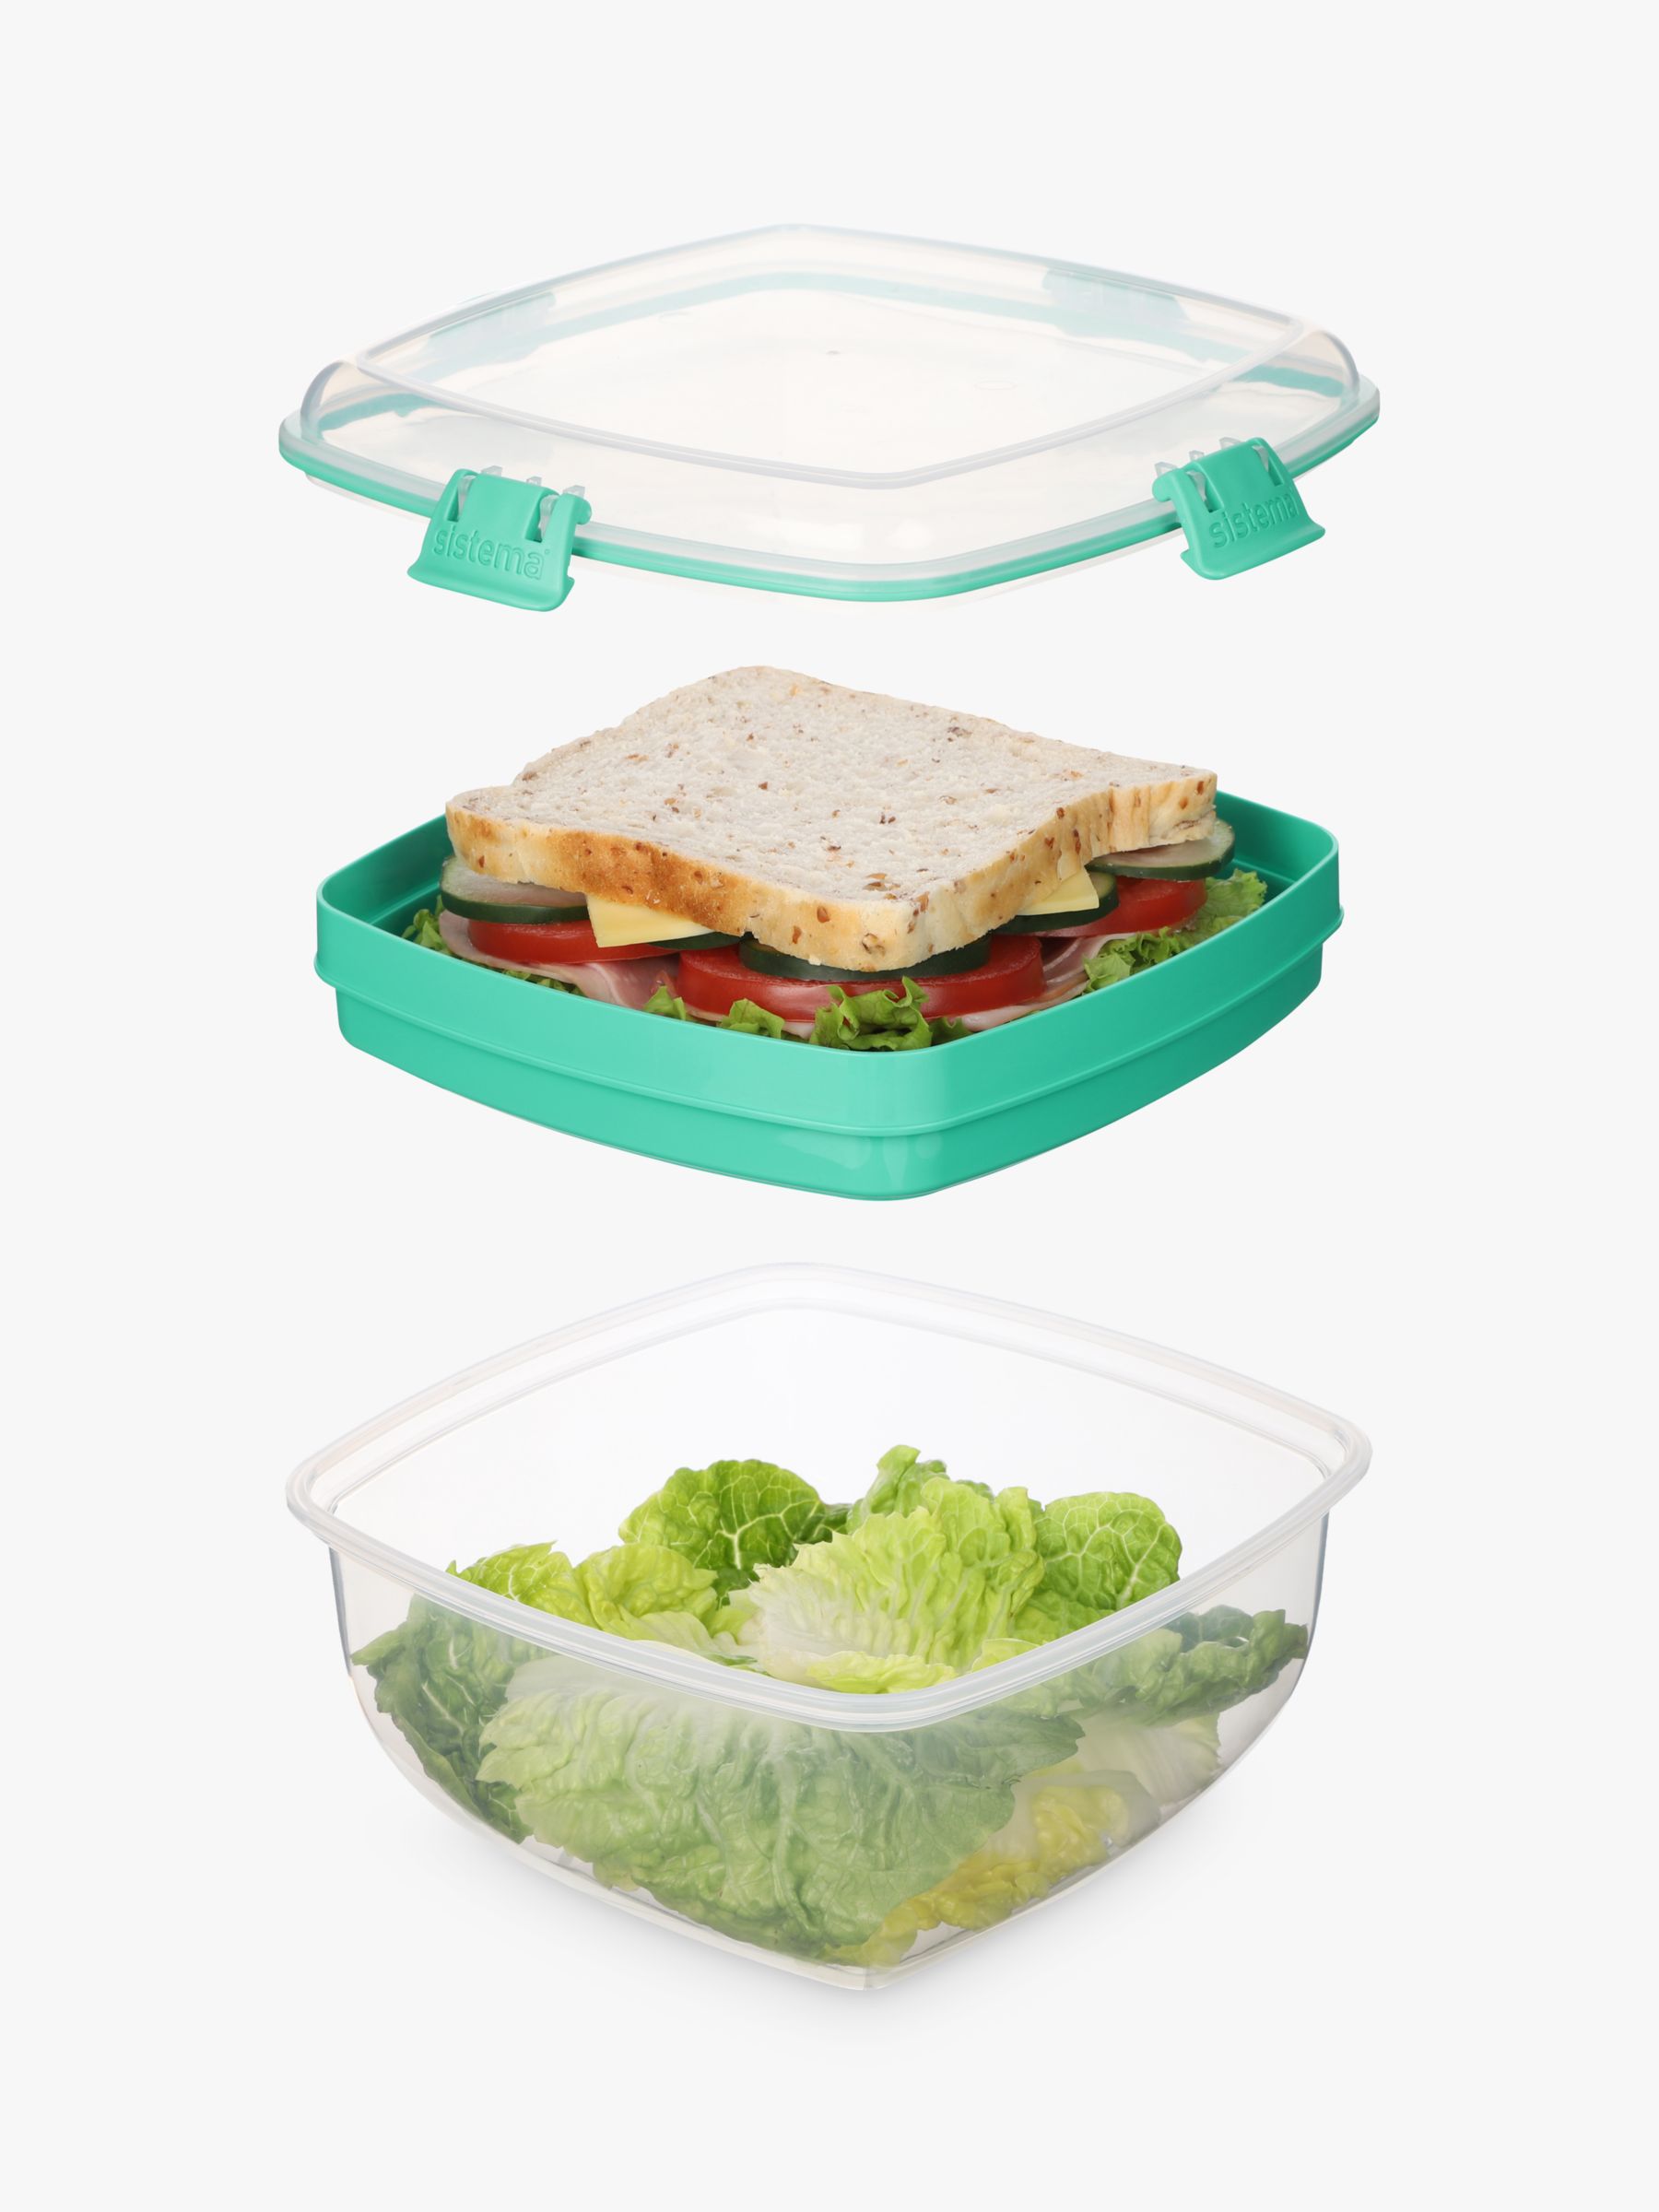 Stainless Steel Lunch Box Container, Metal Snack Box With 2/3 Compartments,  For Teenagers And Workers At School, Classroom, Canteen, Back To School,  Food Storage Container, Bpa Free, Lunch Box For School, Picnic 